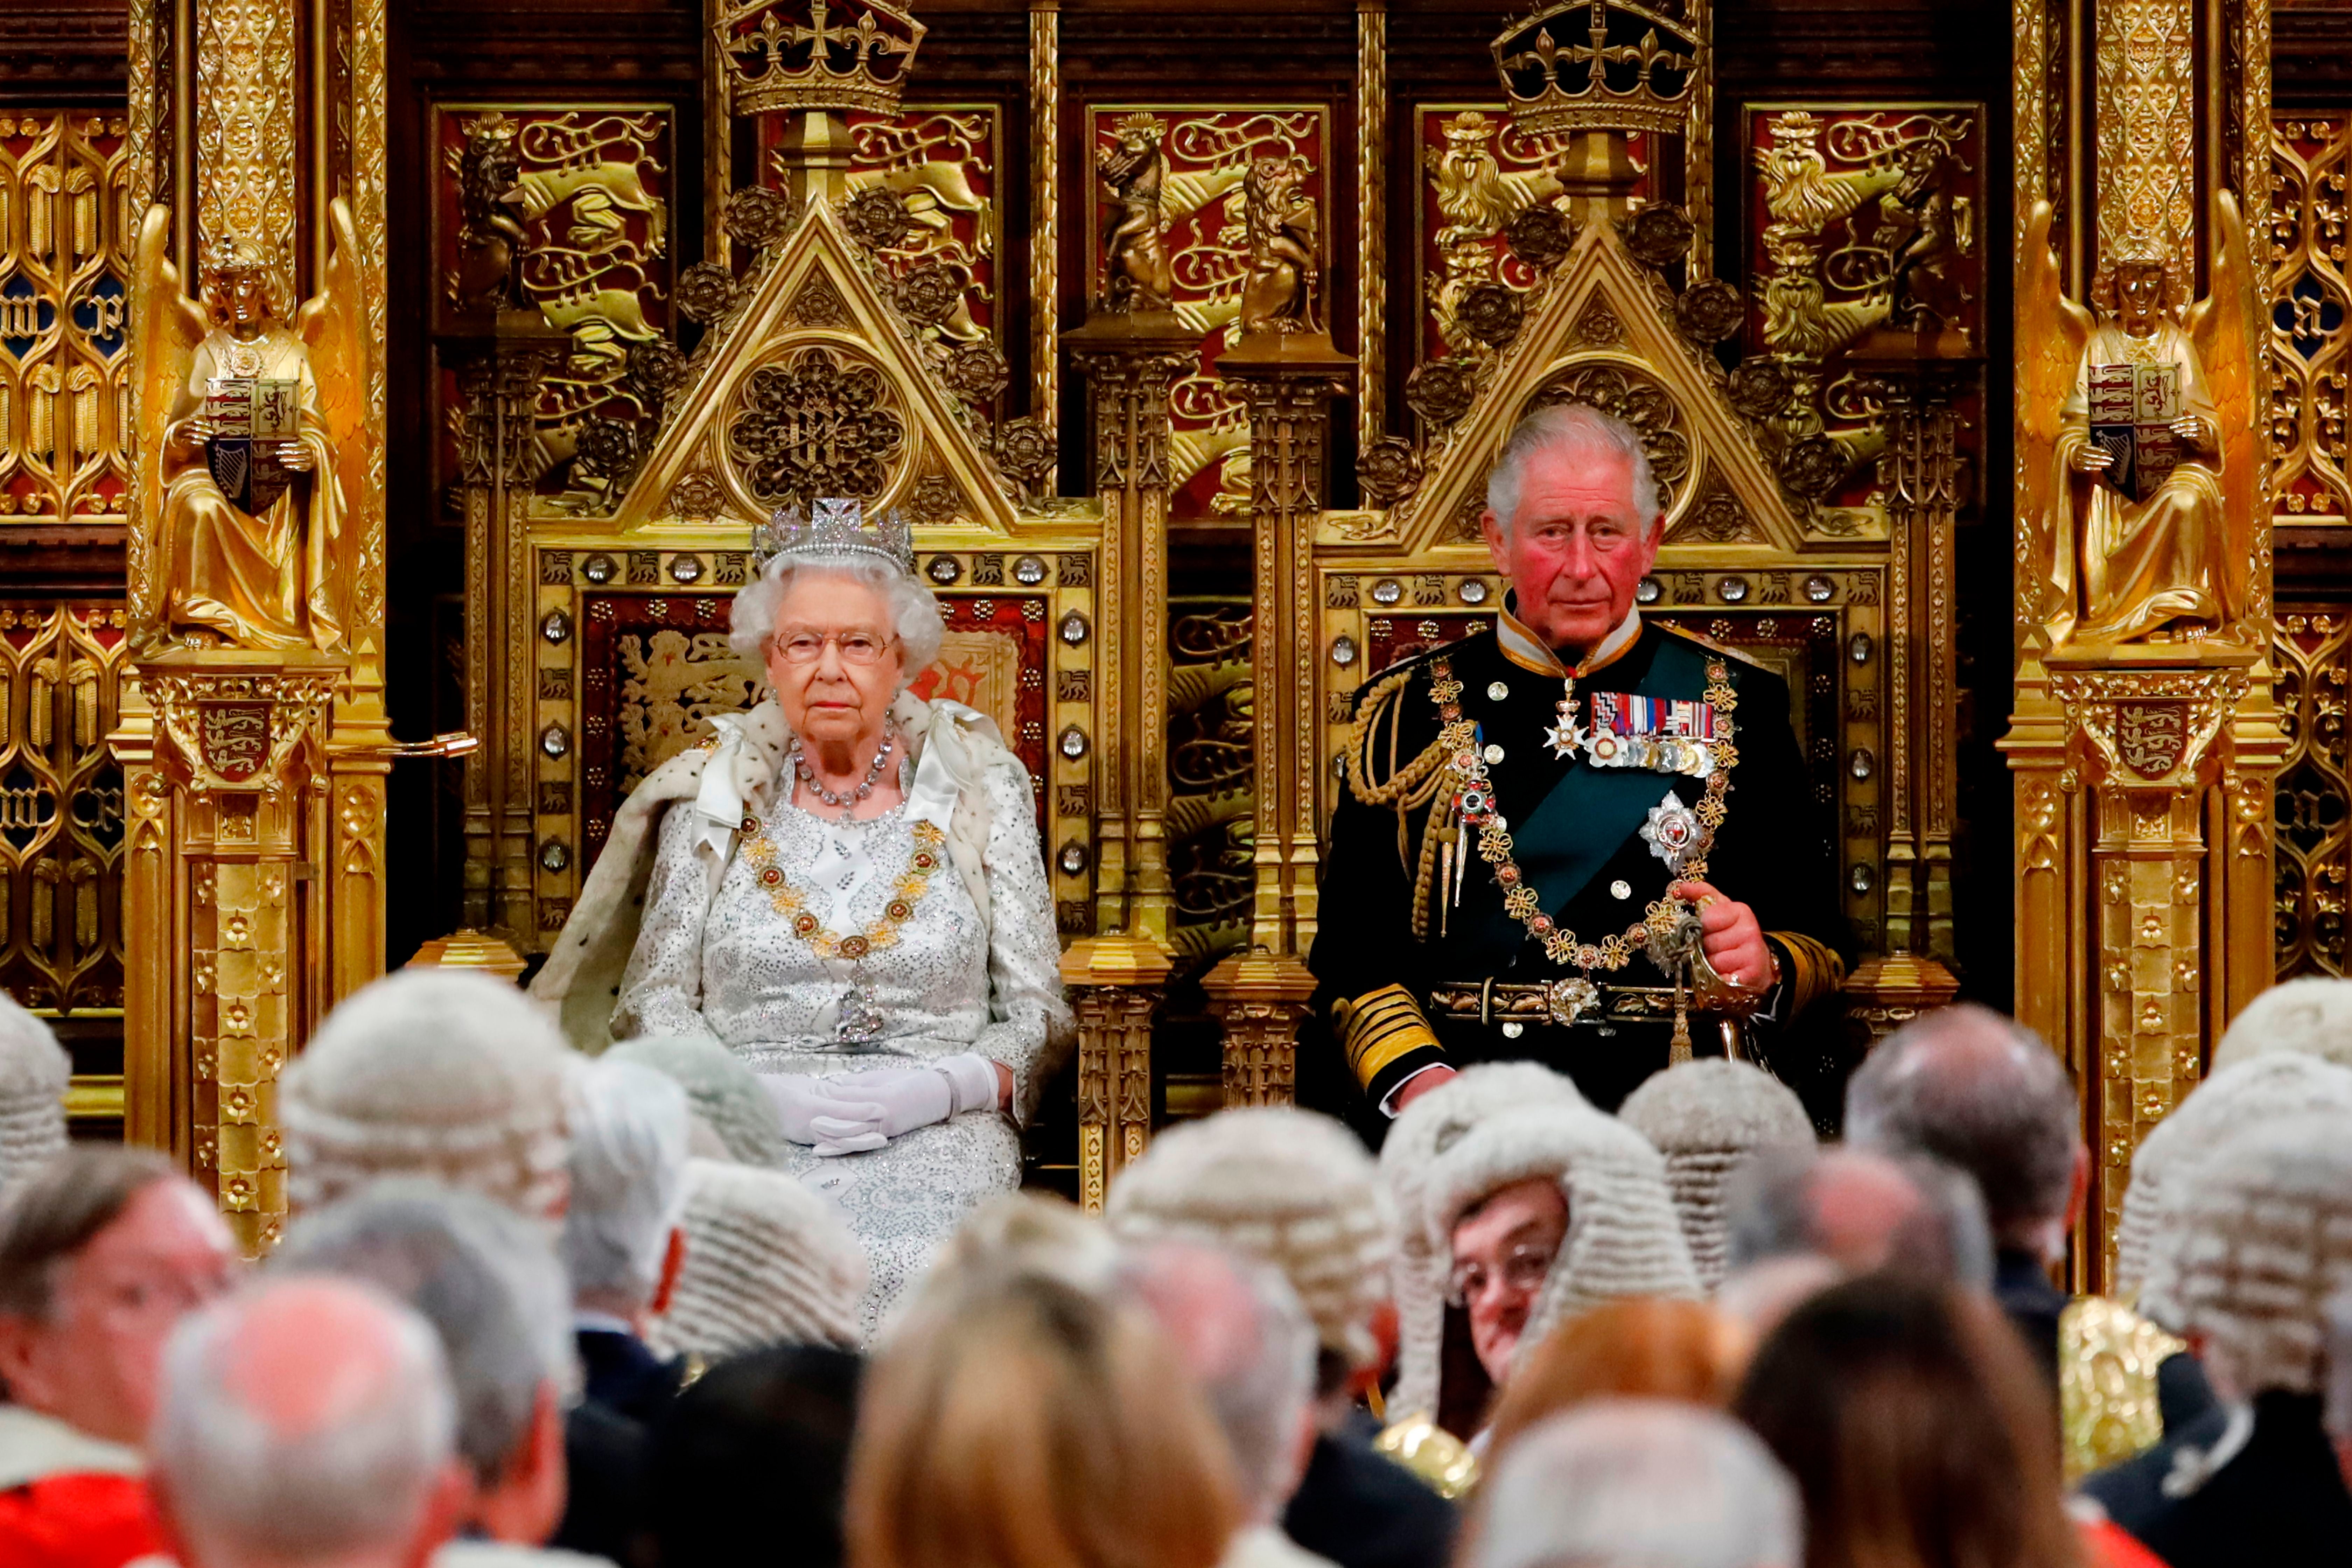 Queen Elizabeth II takes her seat on the The Sovereign's Throne in the House of Lords next to Prince Charles, before reading the Queen's Speech during the State Opening of Parliament in 2019